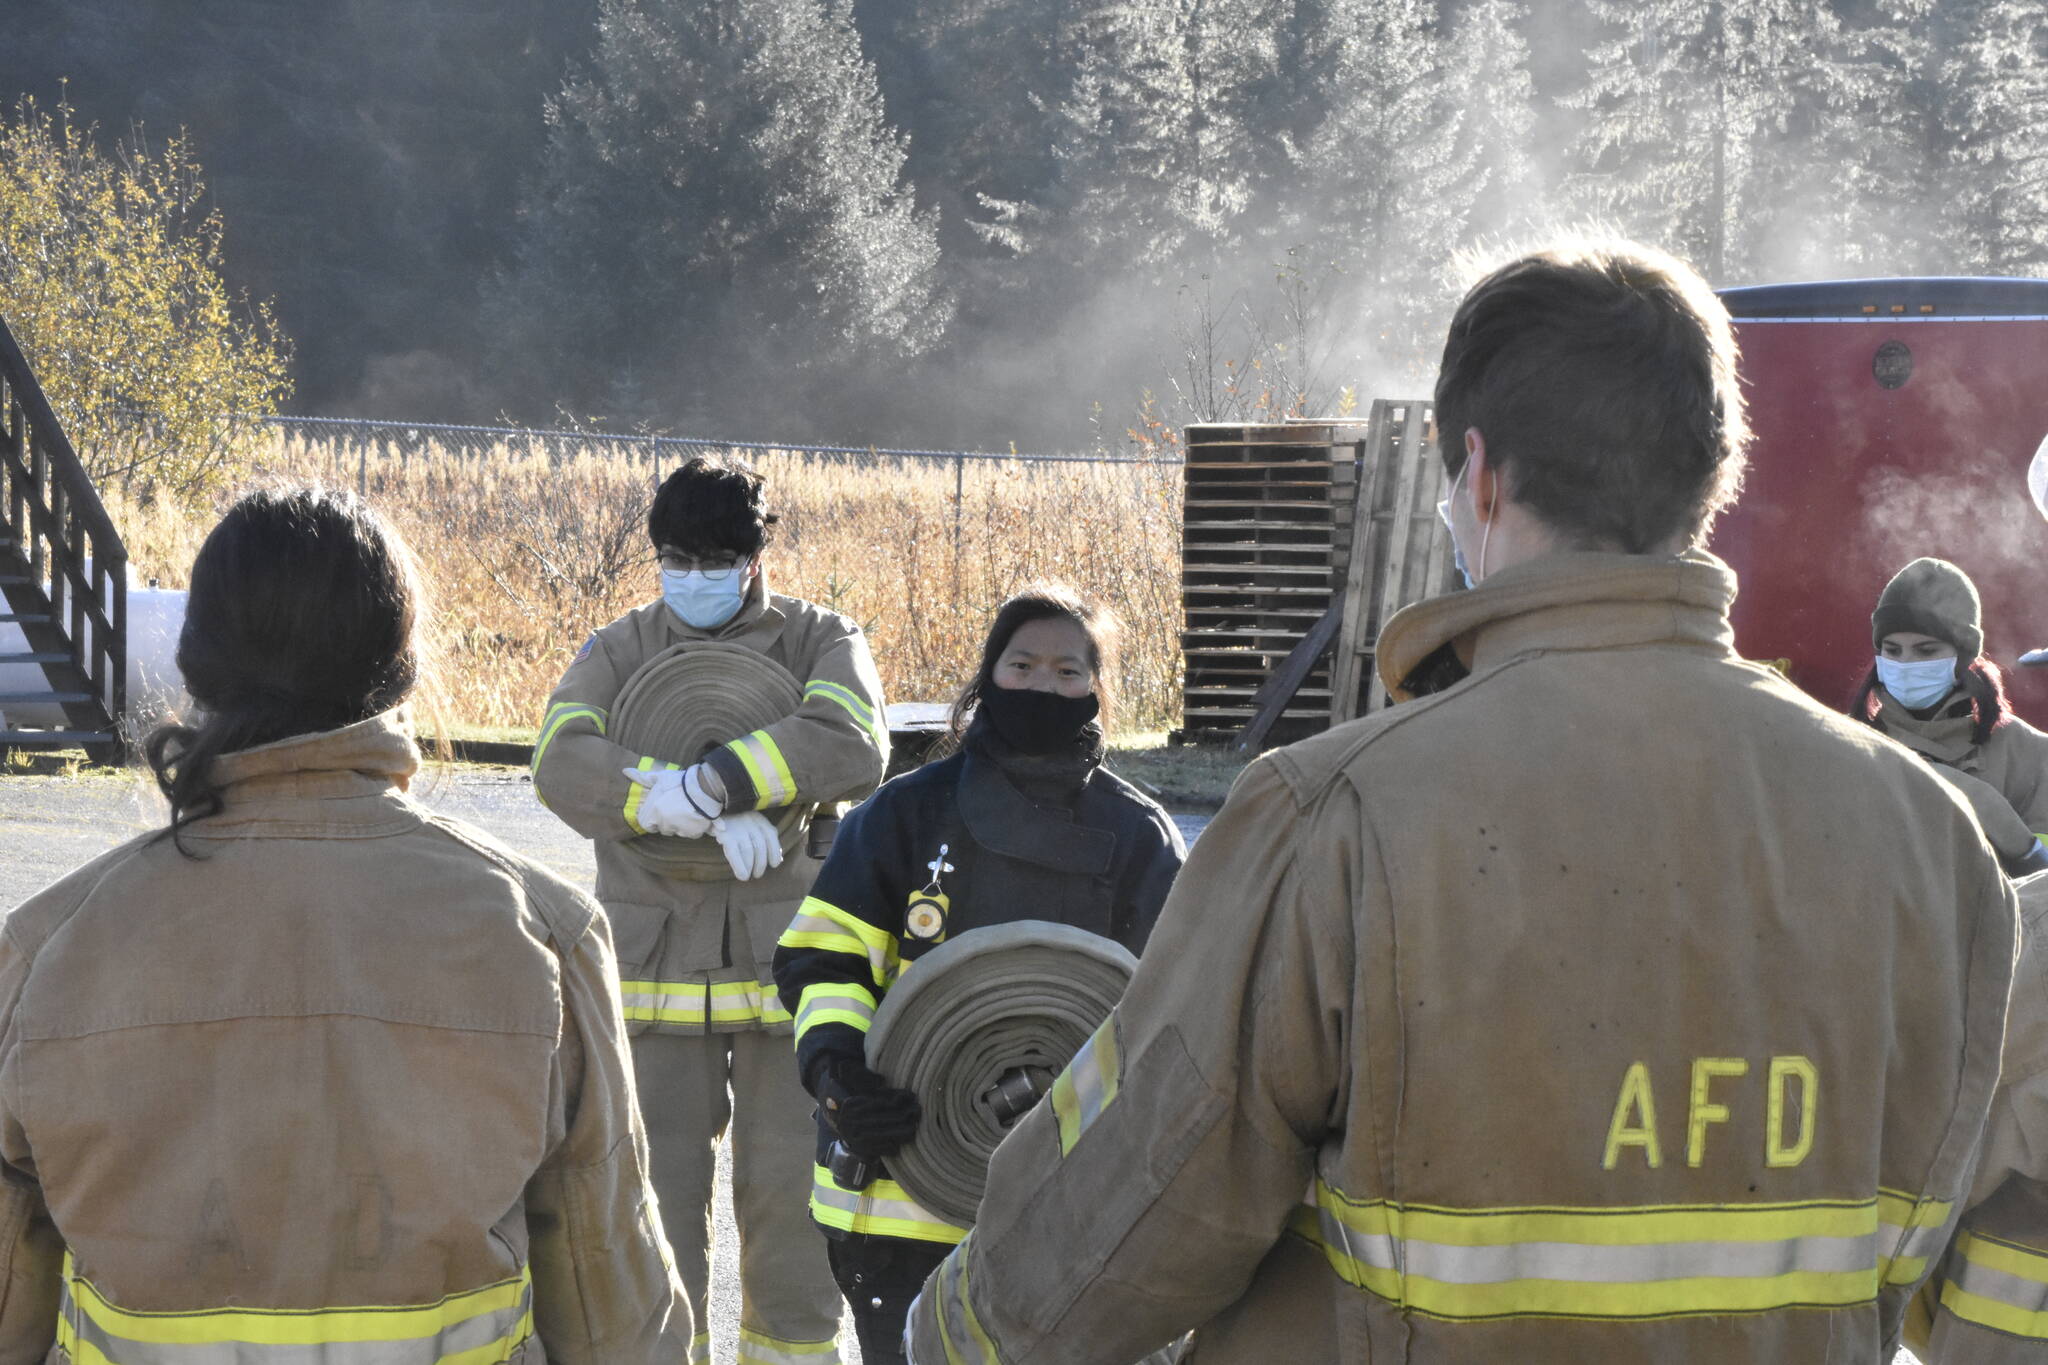 Capital City Fire/Rescue's Cadet Program is in session once again, meeting at Hagevig Regional Fire Training Center the on the first three Saturdays of each month for high schoolers to learn more about the job. (Peter Segall / Juneau Empire)